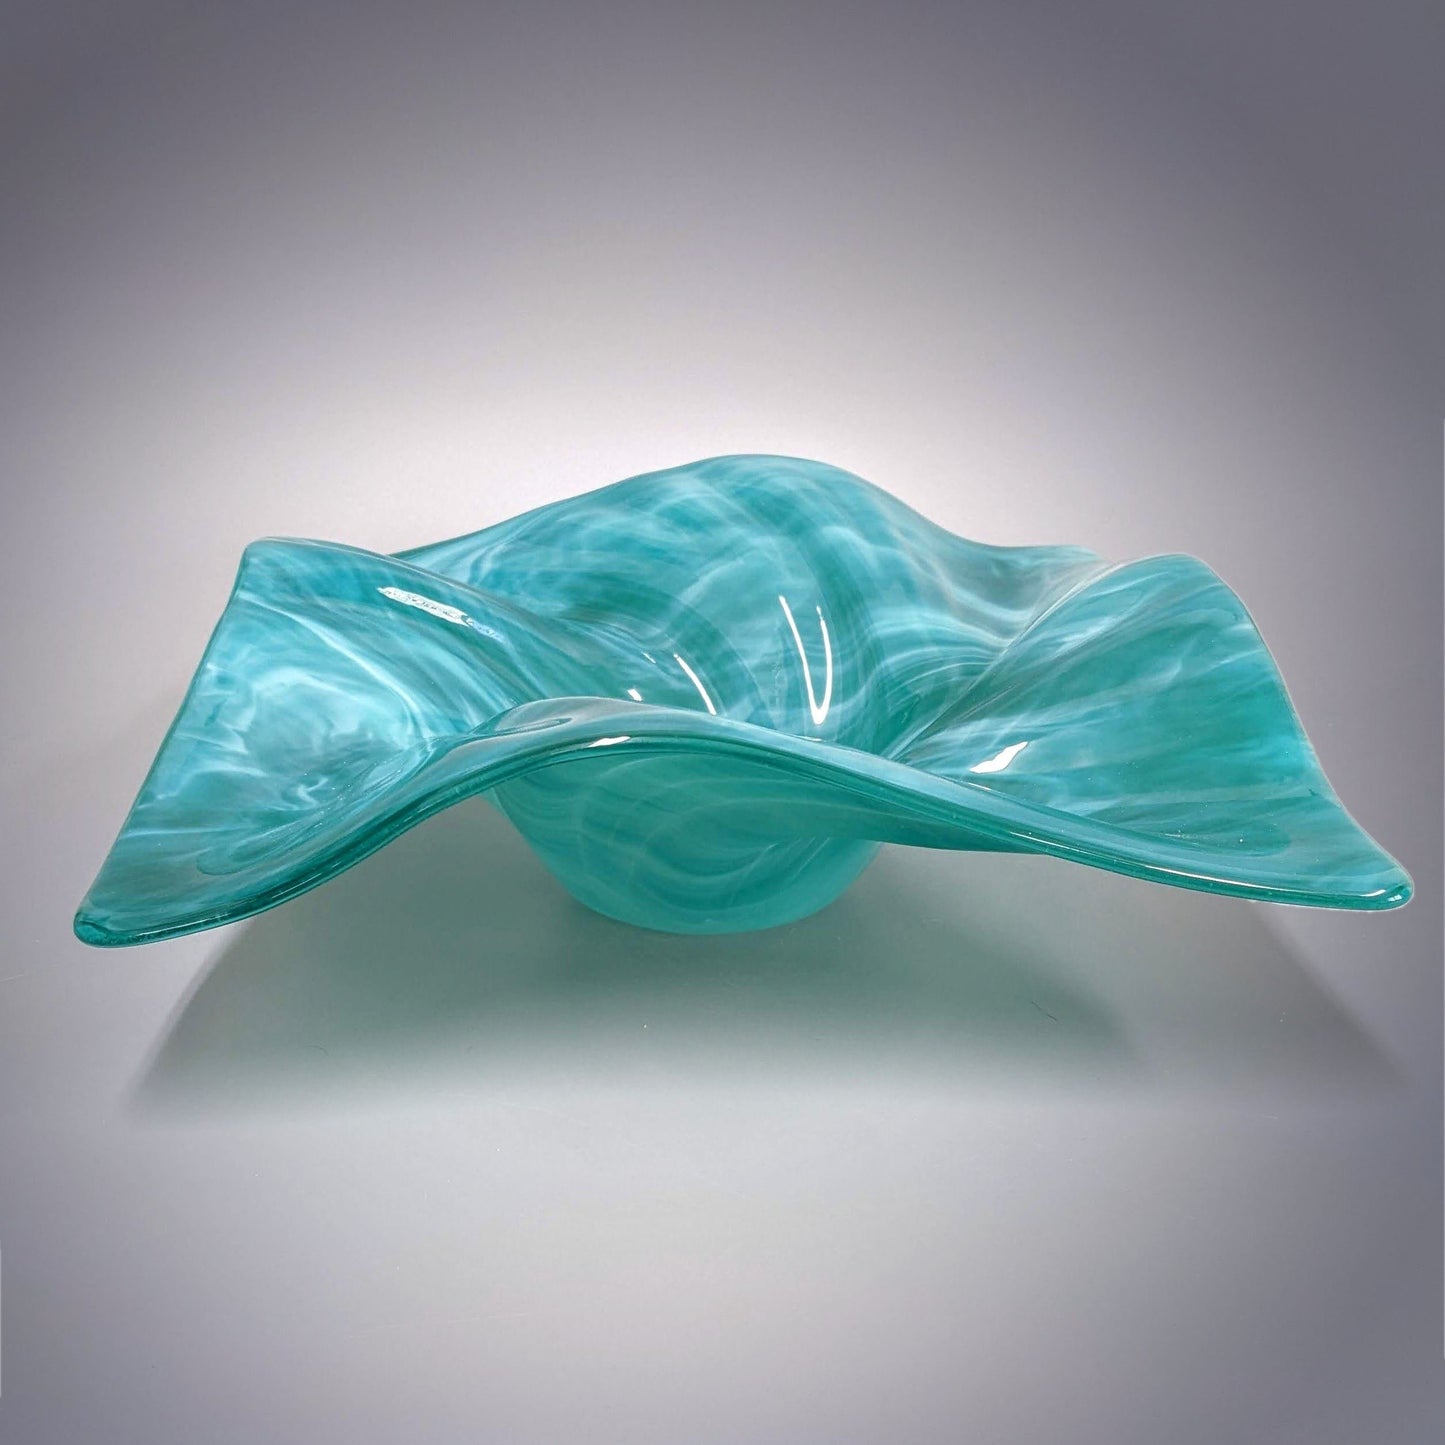 Glass Art Wave Bowl in Aqua Blue Green and White